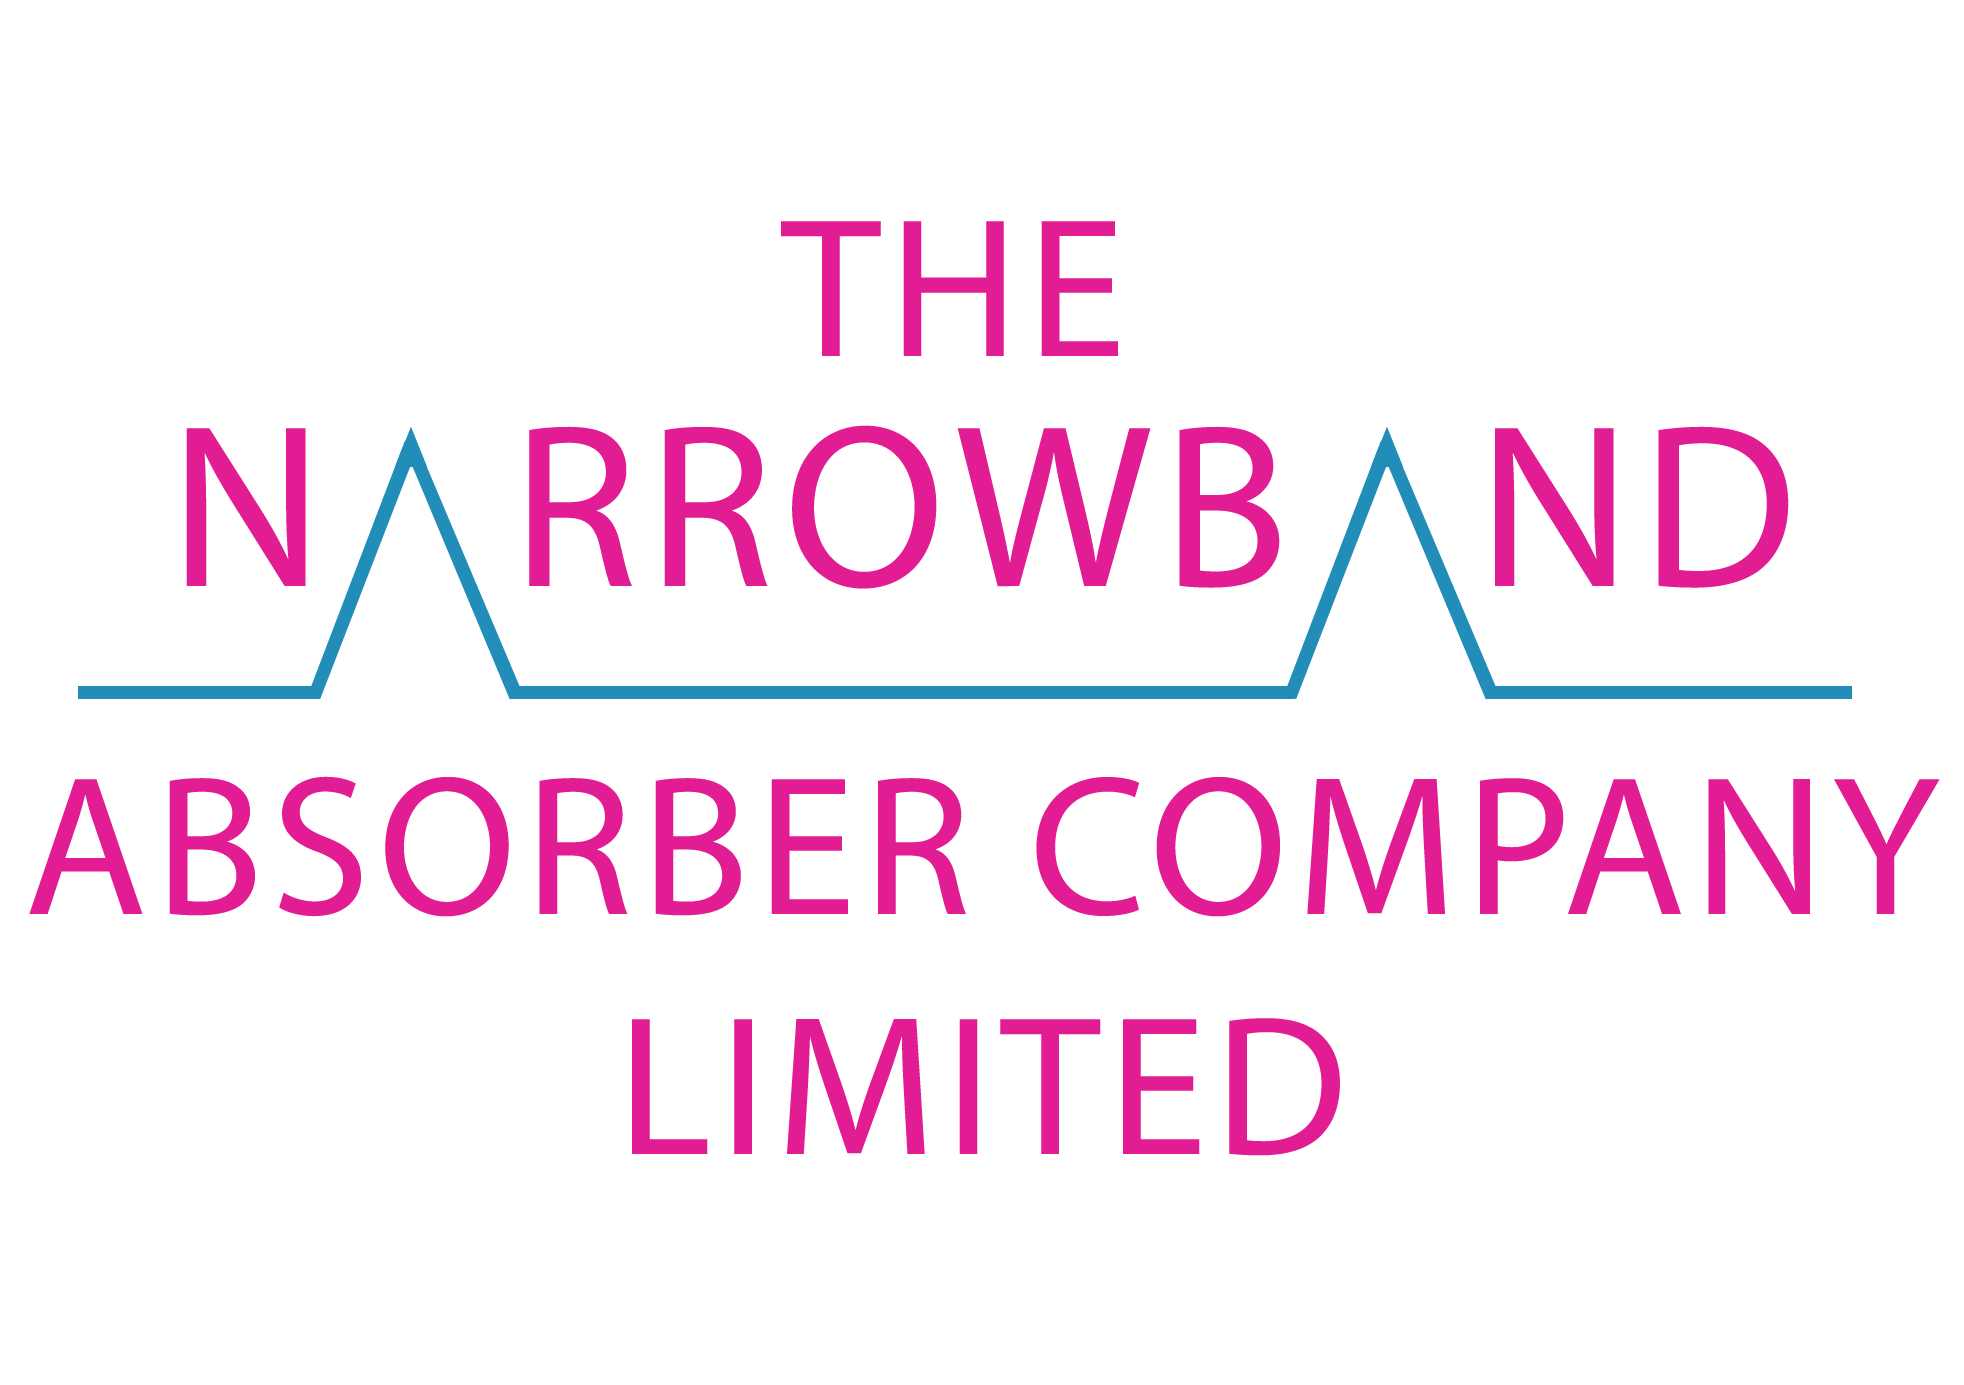 The Narrowband Absorber Company Limited